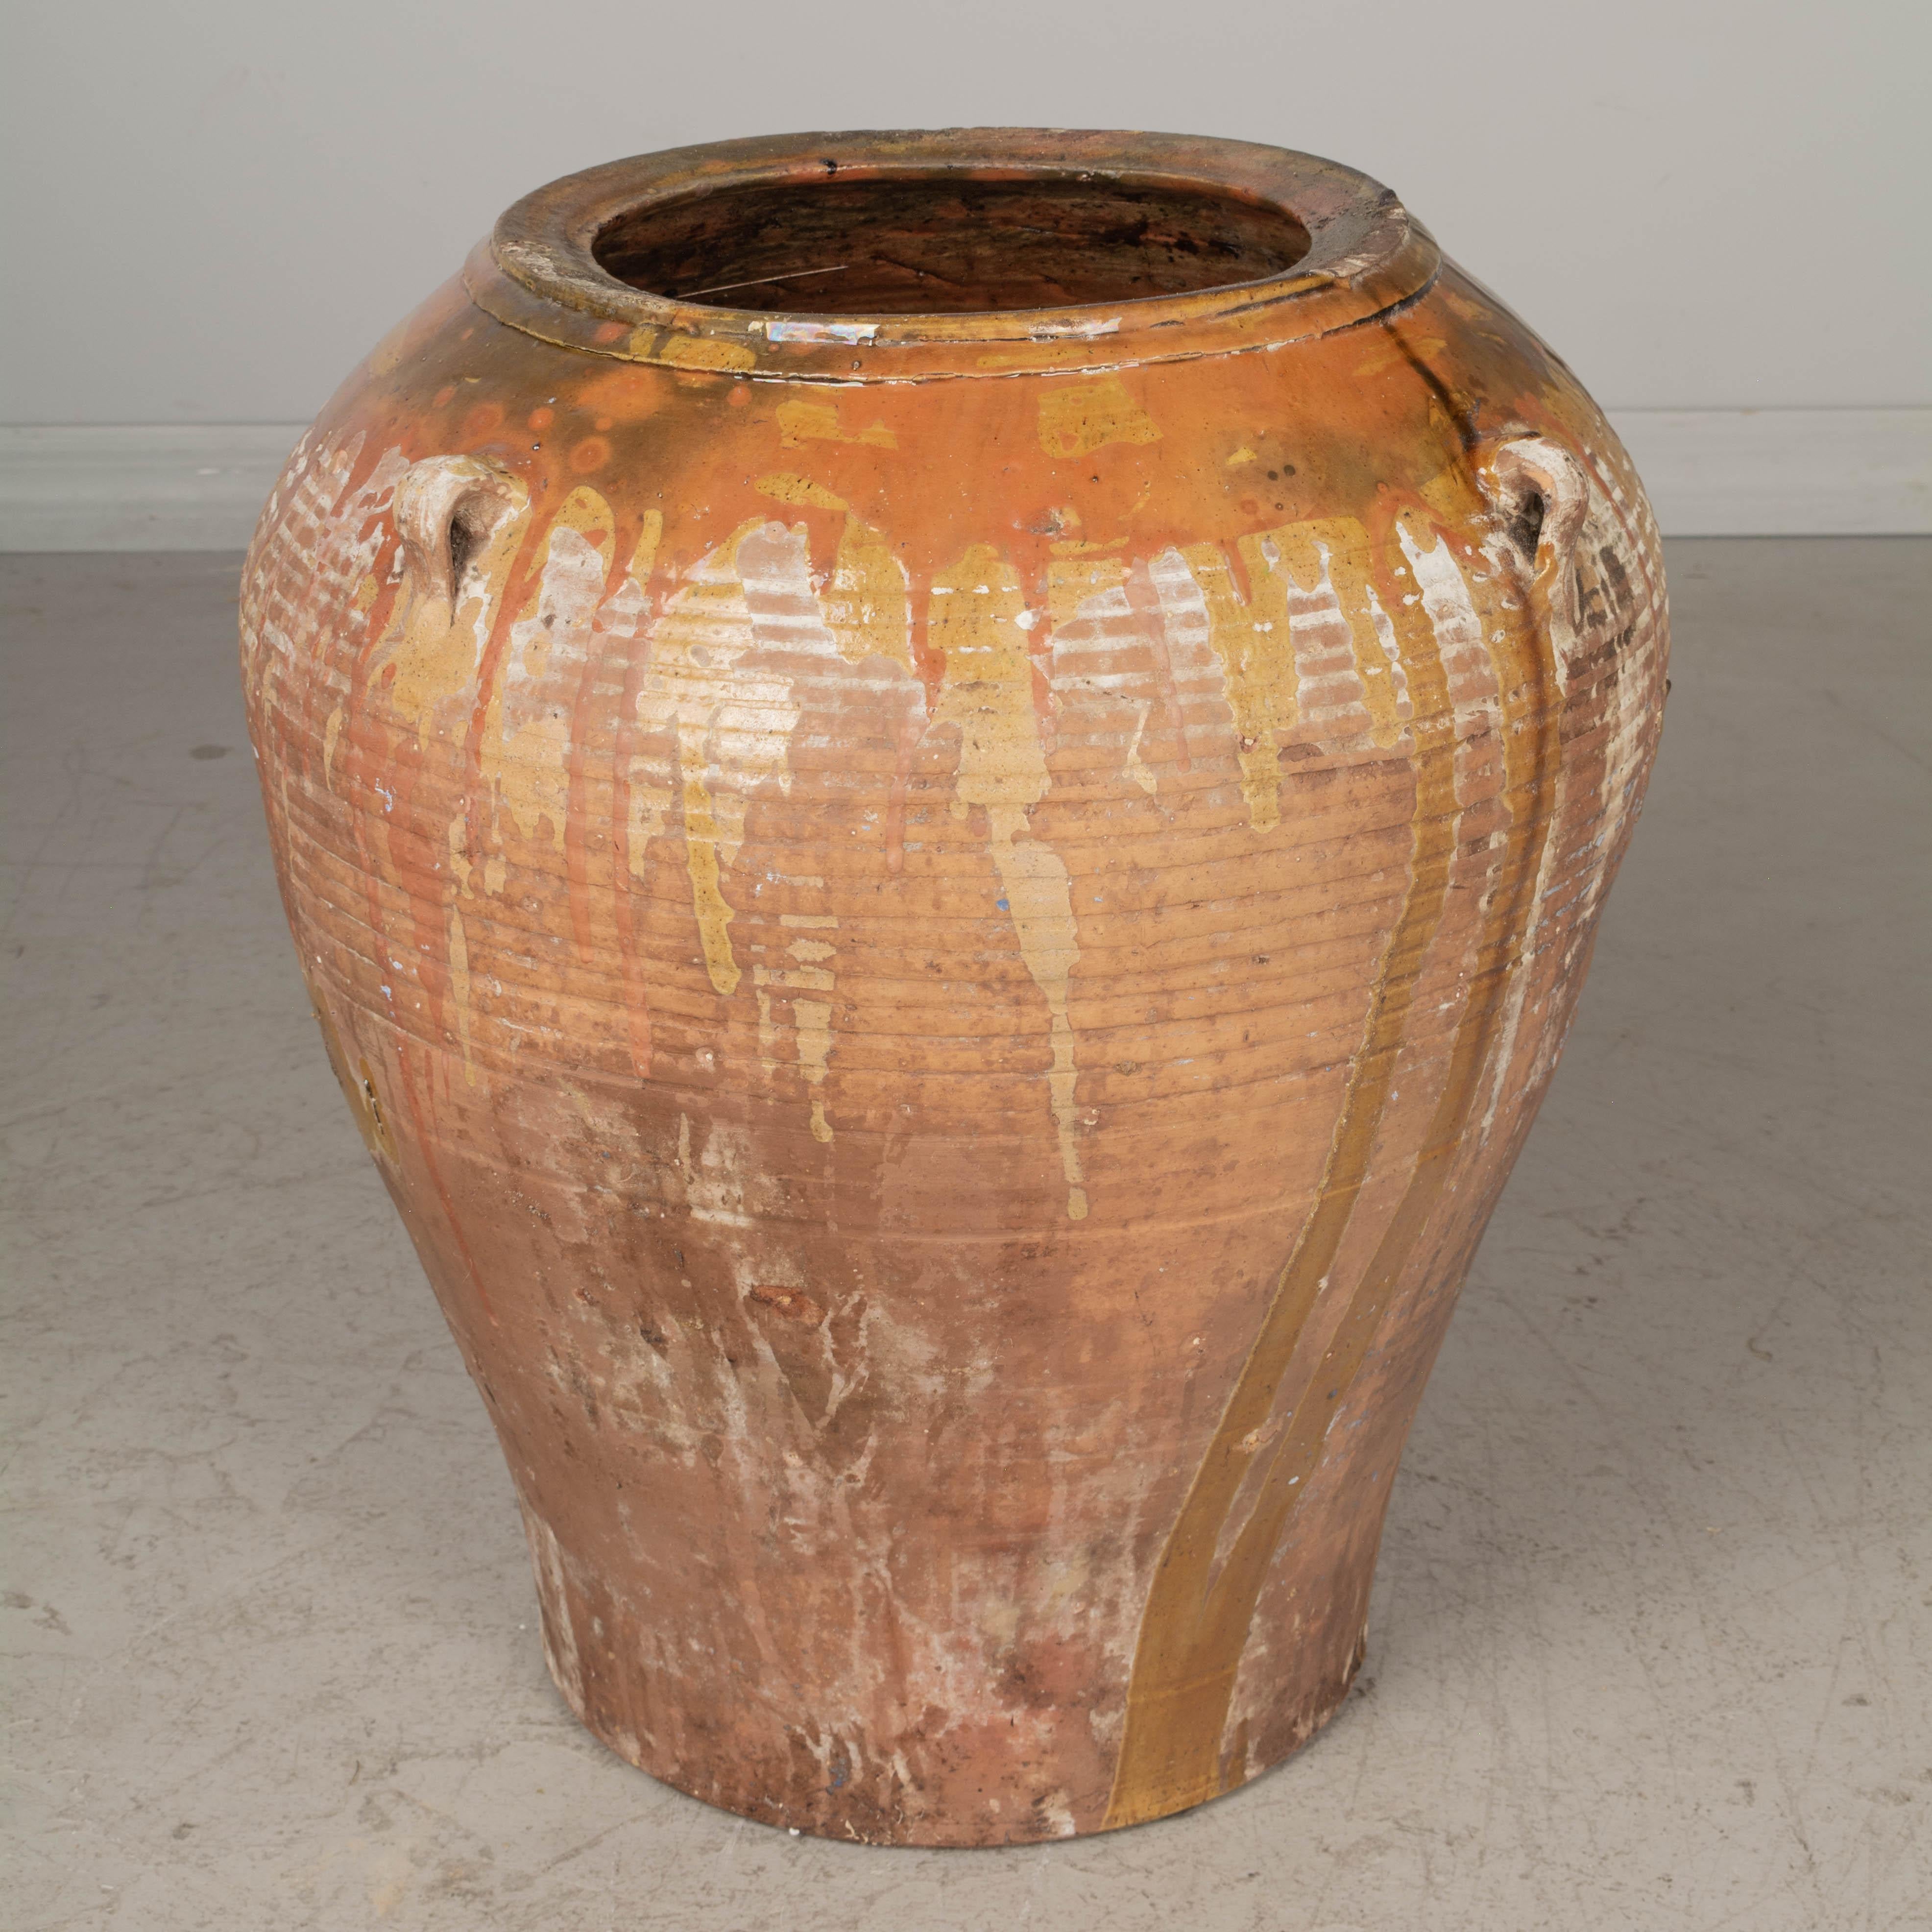 A large 19th century Spanish terracotta olive jar with orange, yellow and green glaze at the rim dripping down the sides. Three small handles. Old weathered patina. Minor losses. Nice as a decorative piece for use indoors or on a terrace. Large